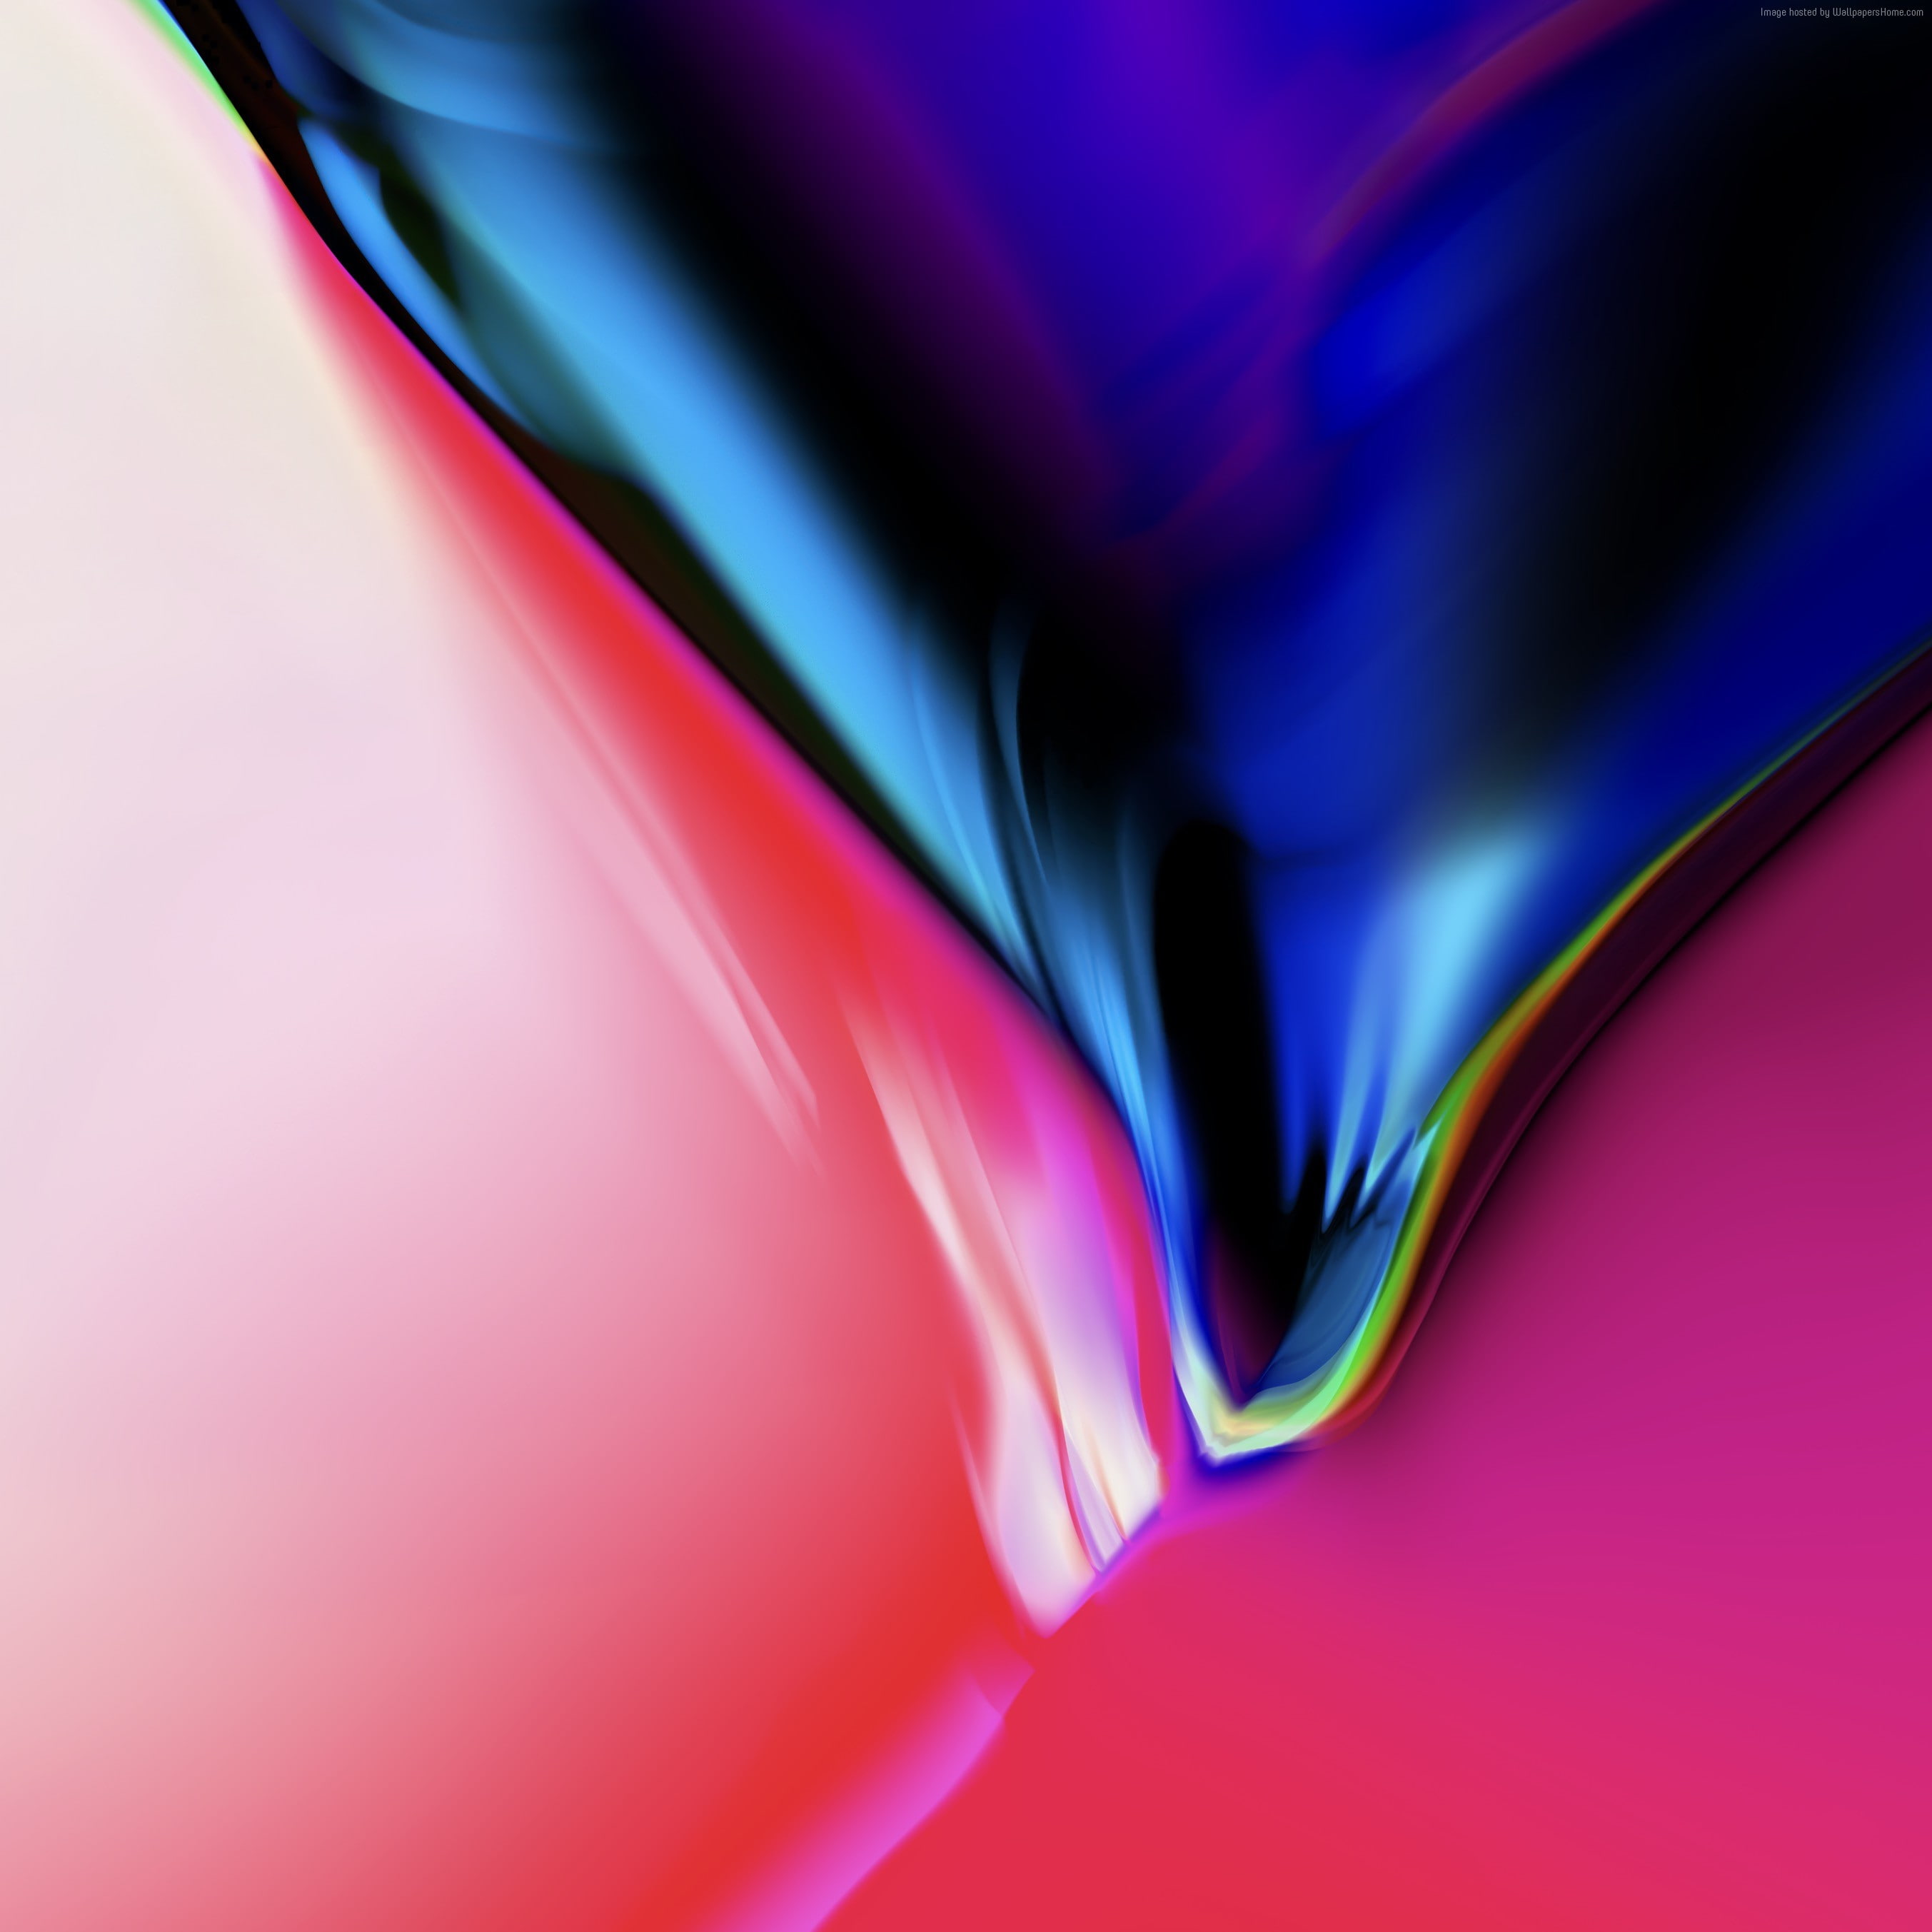 HD, colorful, iPhone 8, iOS 11, iPhone X